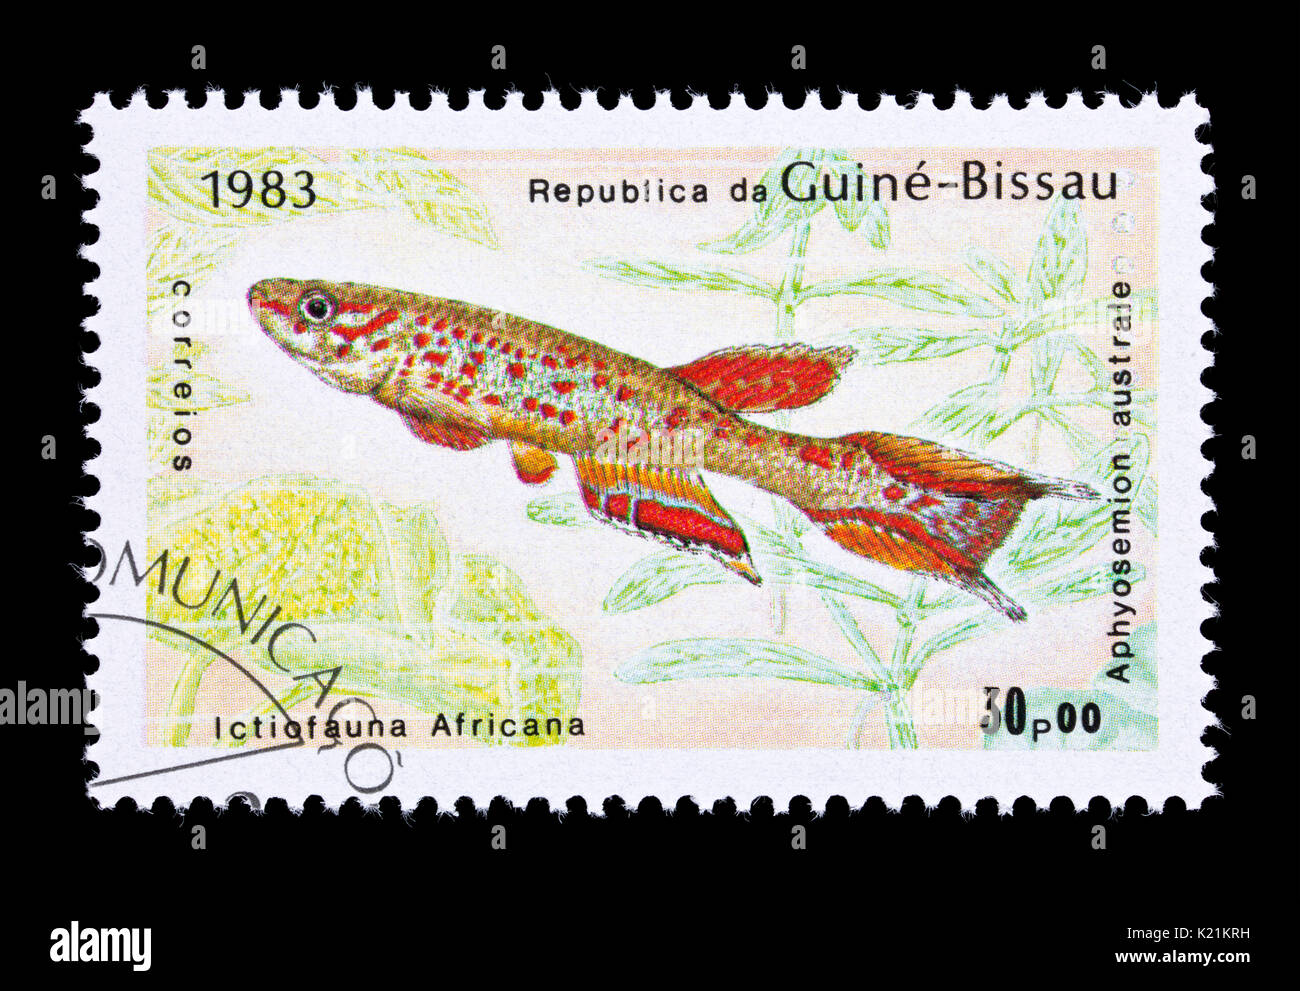 Postage stamp from Guinea-Bissau depicting a (Aphyosemion australe) Stock Photo